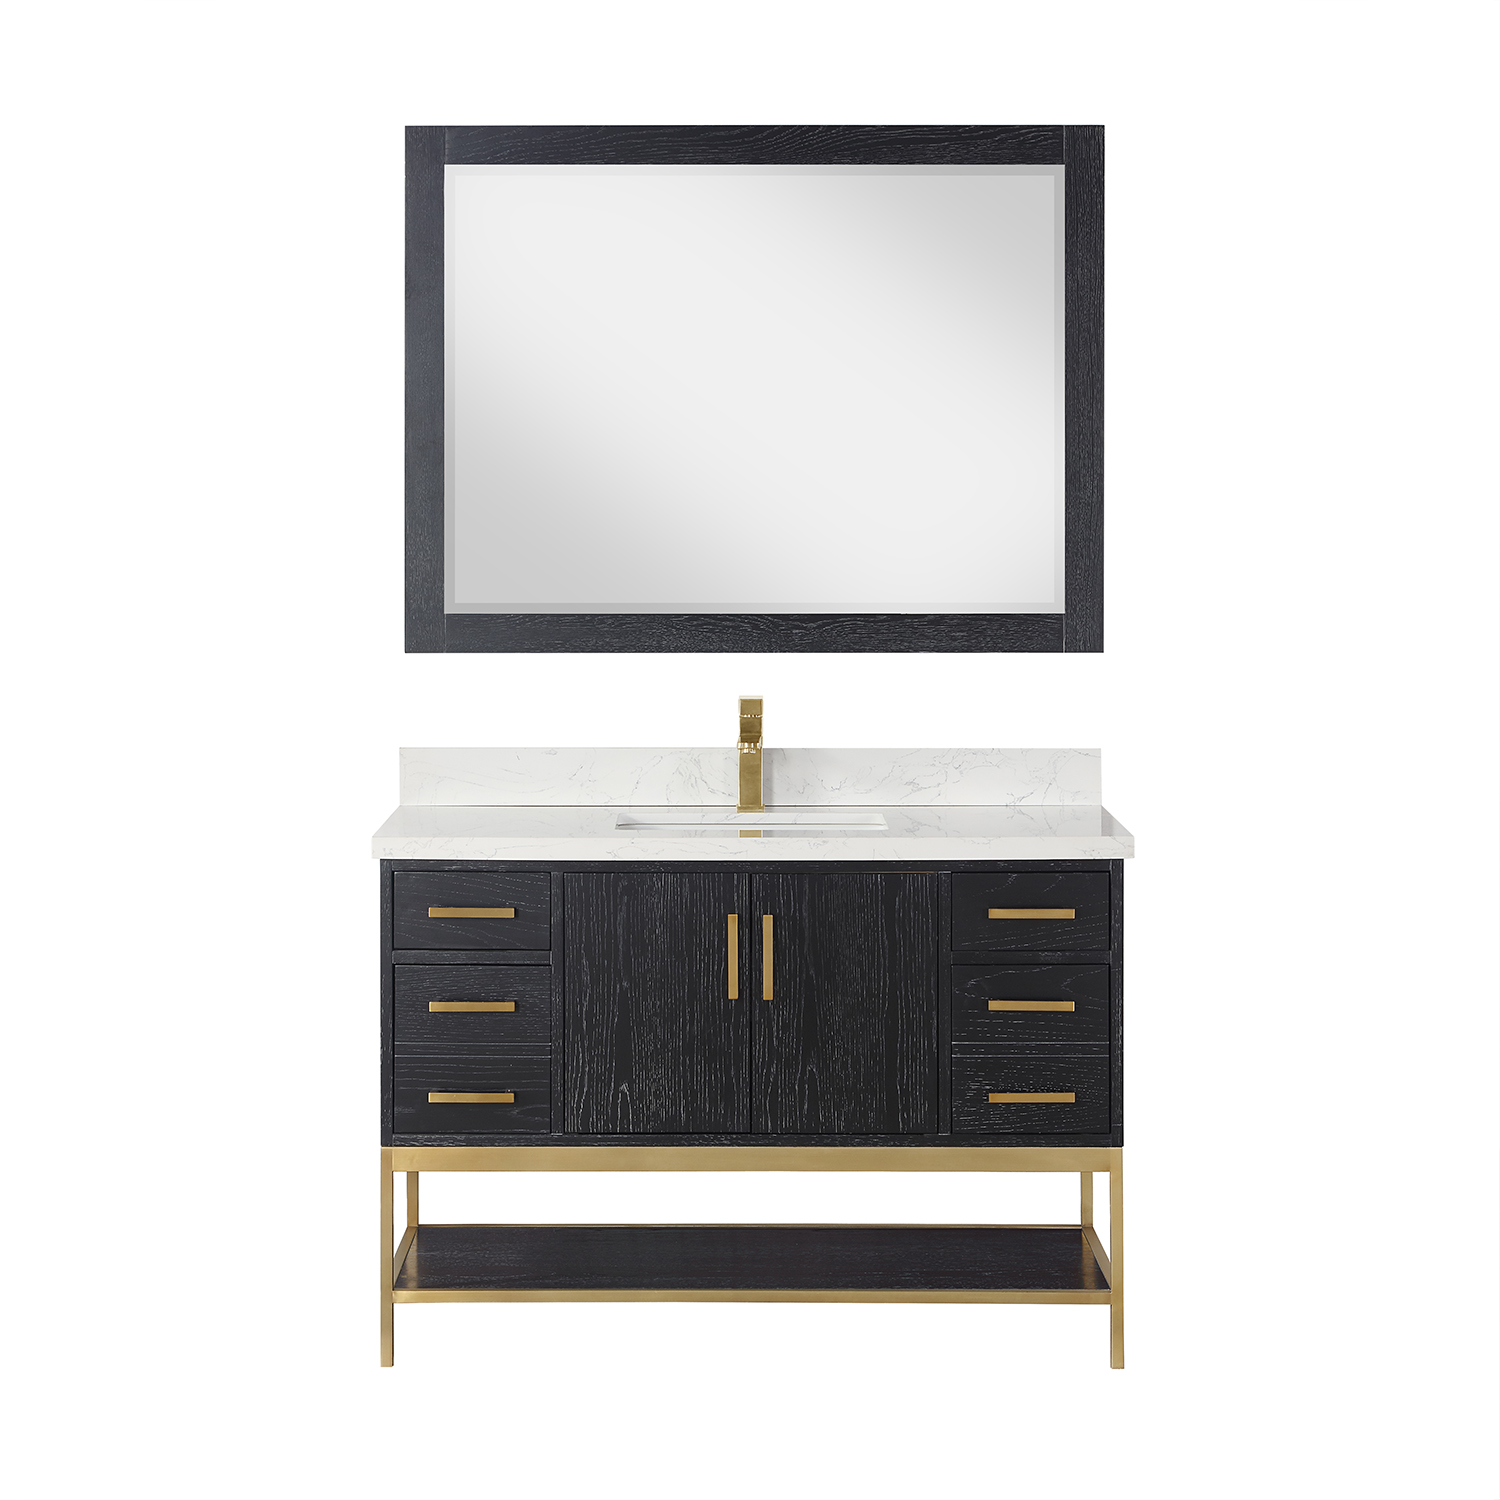 Issac Edwards Collection 48" Single Bathroom Vanity Set in Black Oak with Grain White Composite Stone Countertop without Mirror